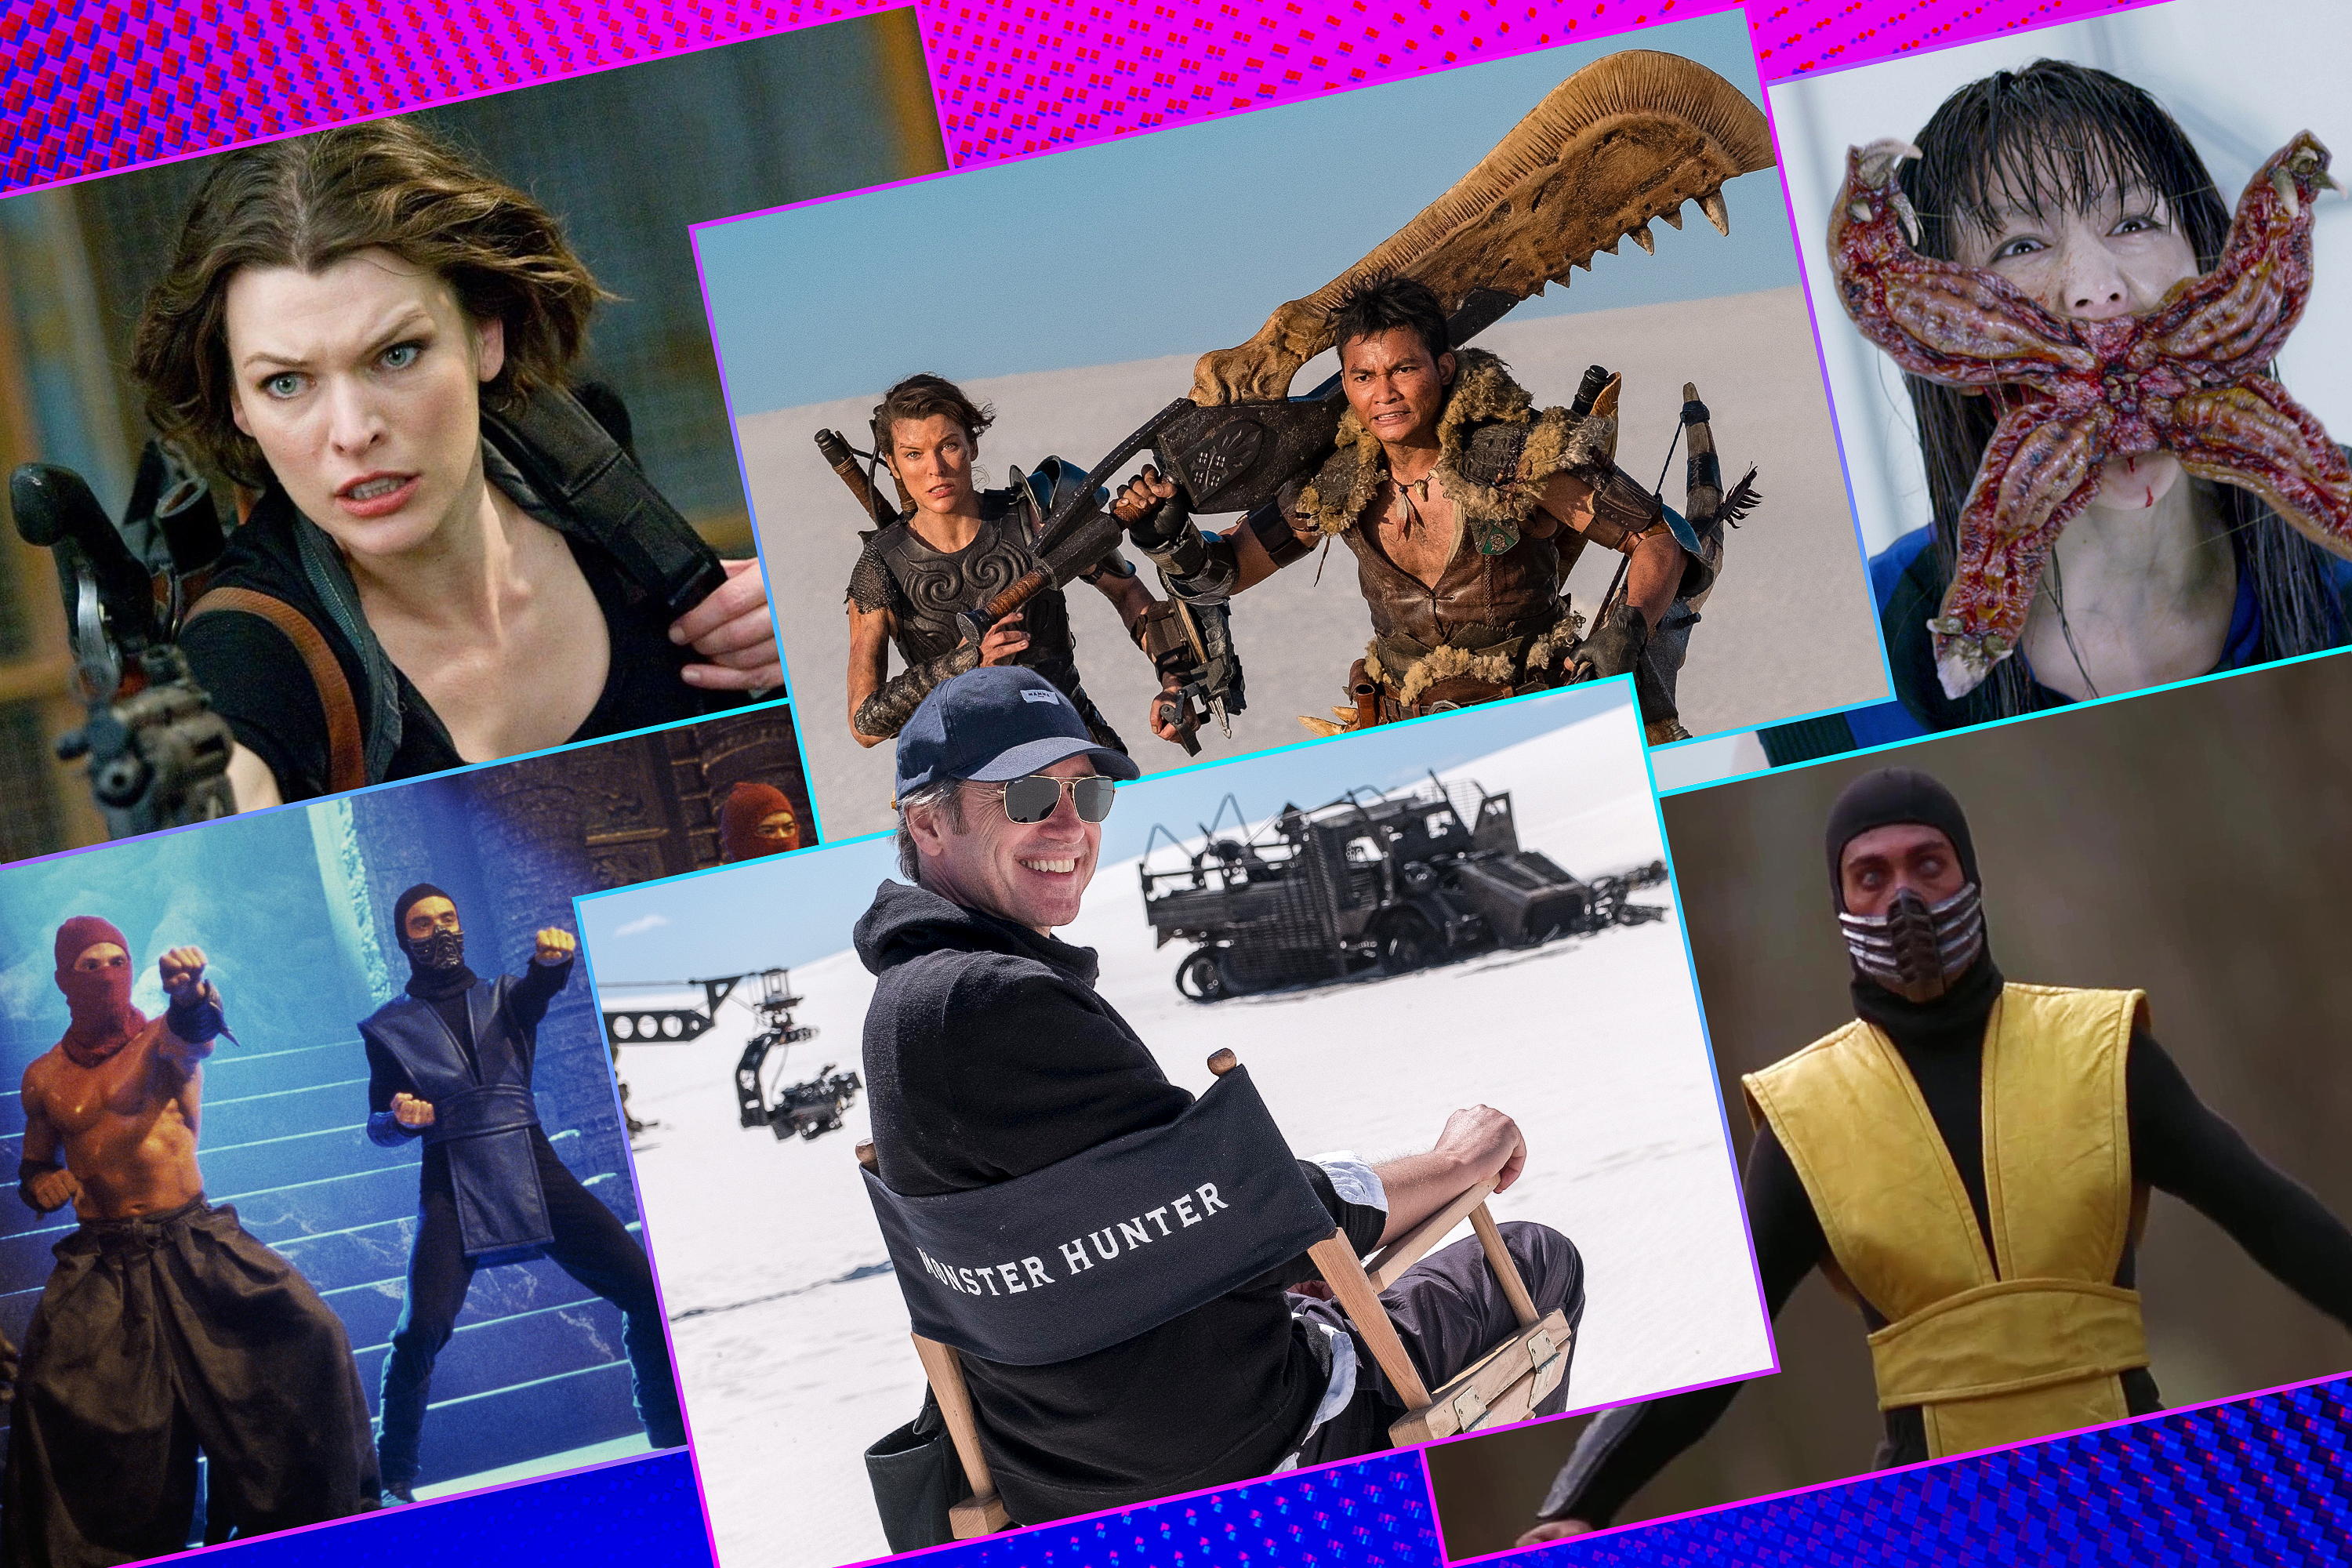 Graphic grid of six rectangles on bright purple blue background with images from the movies Monster Hunter, Mortal Combat, Resident Evil and a photo of director Paul Anderson